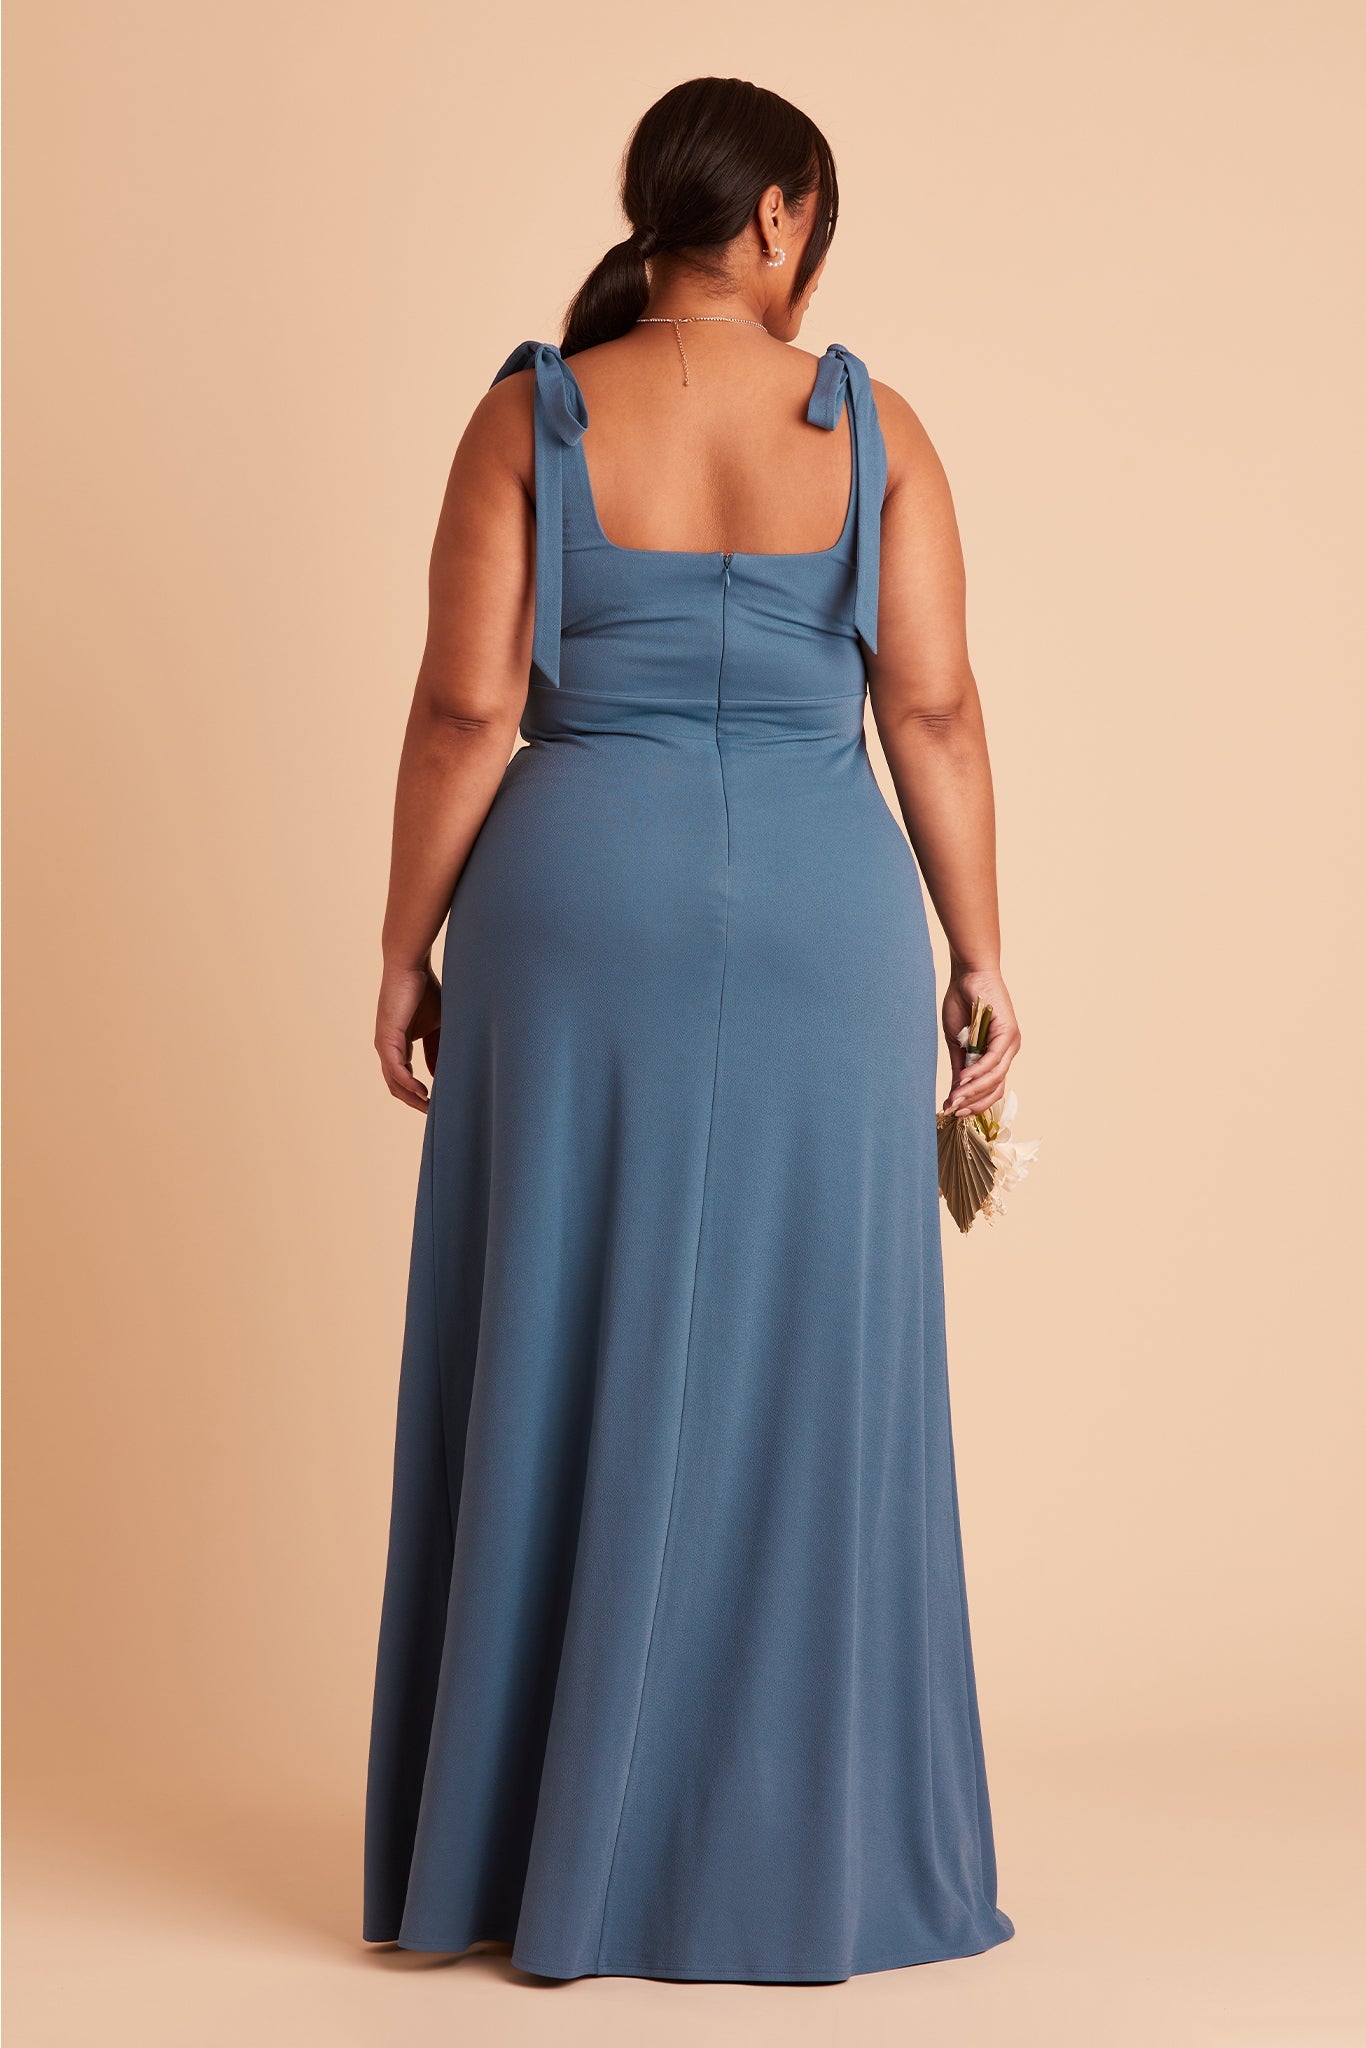 Alex convertible plus size bridesmaid dress with slit in twilight crepe by Birdy Grey, back view